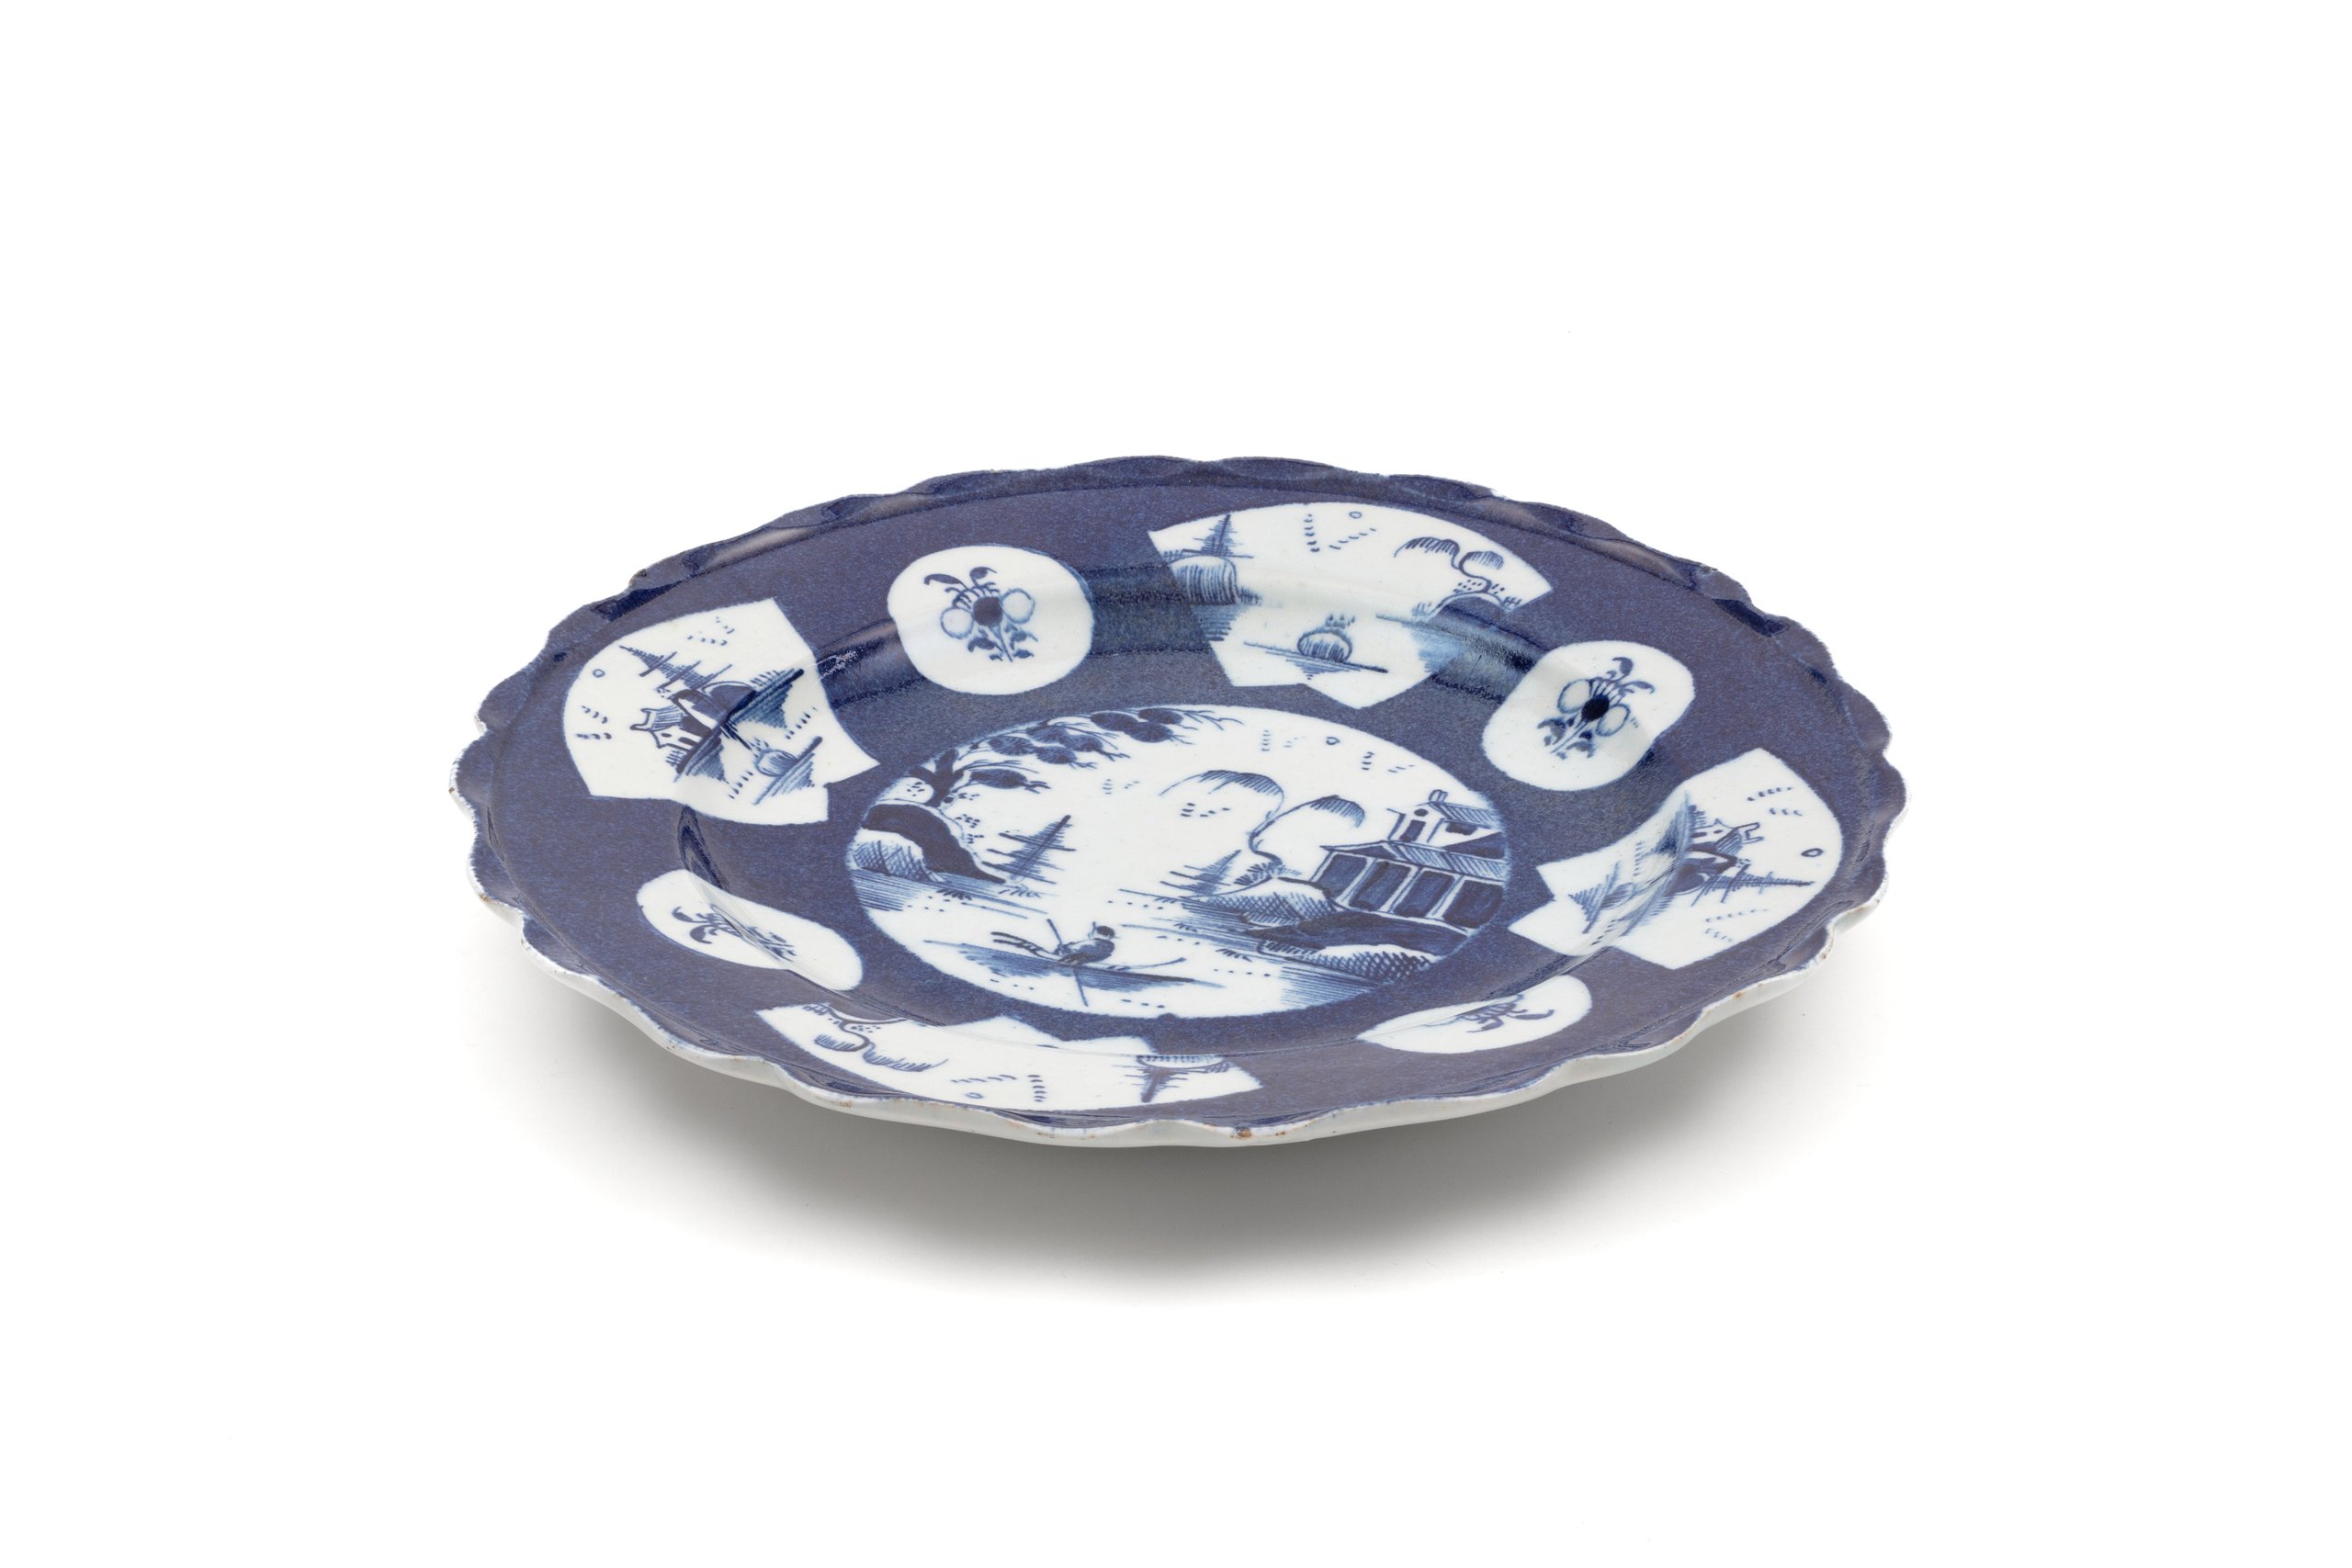 Earthenware plate made by Bow China Works